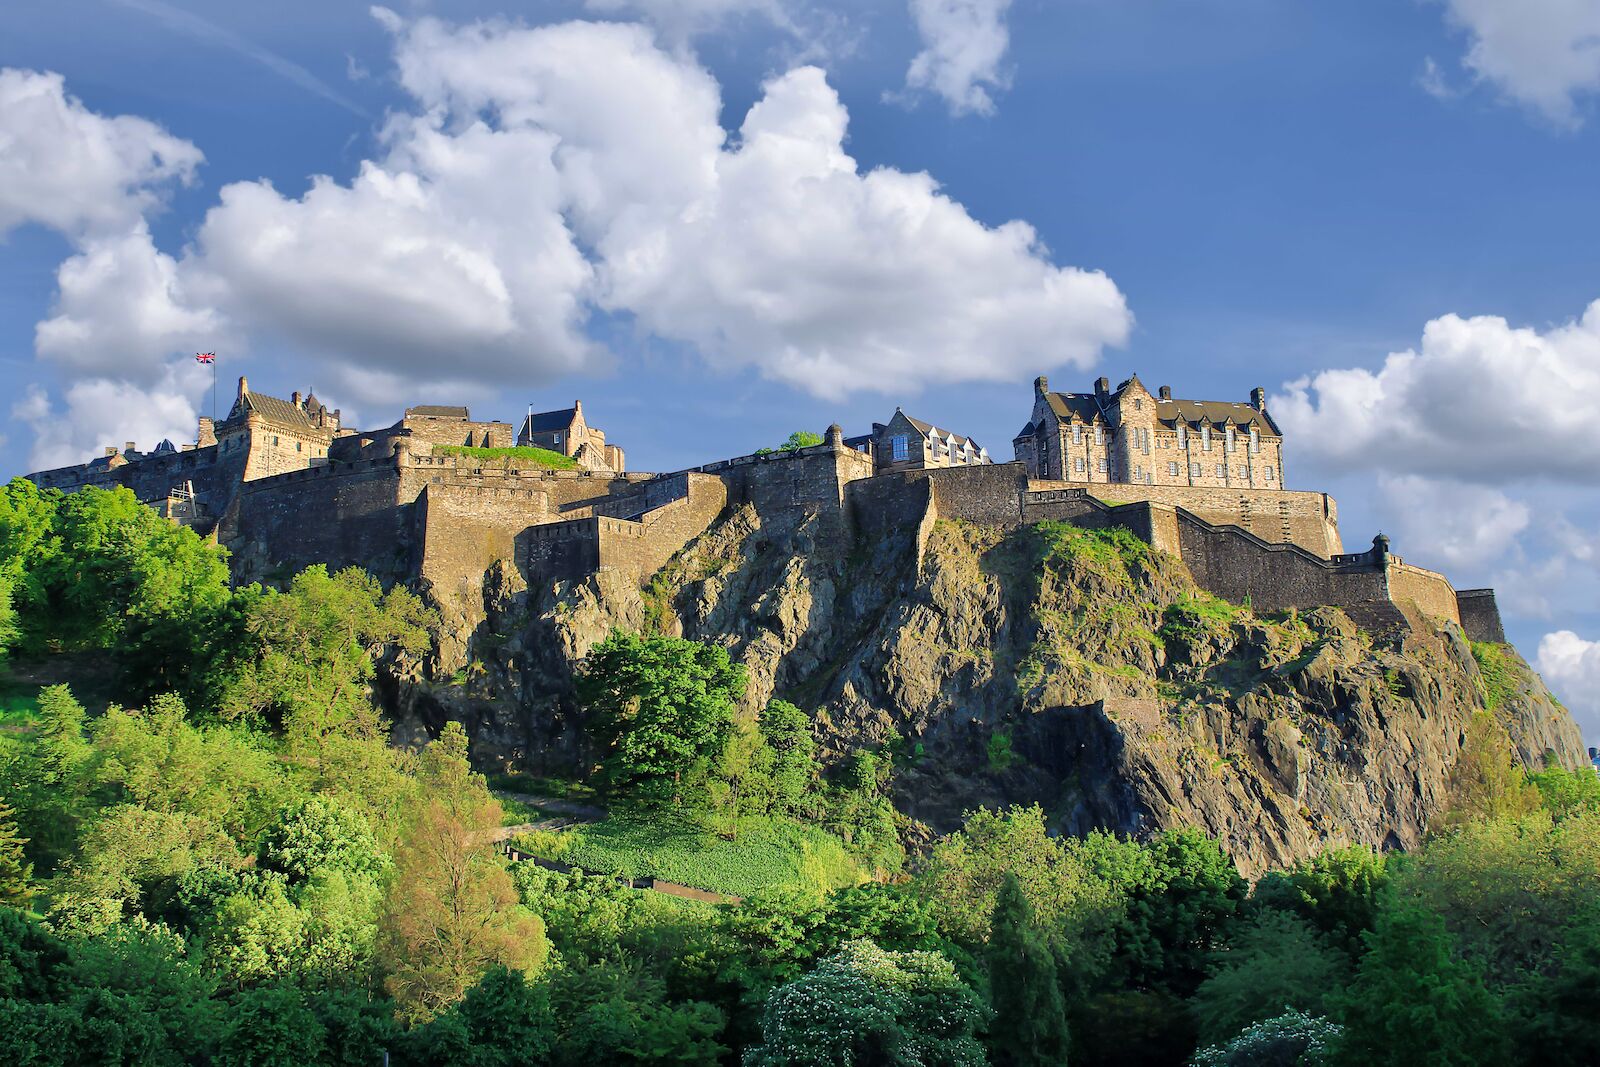 View of Edinburgh Castle from the streets below